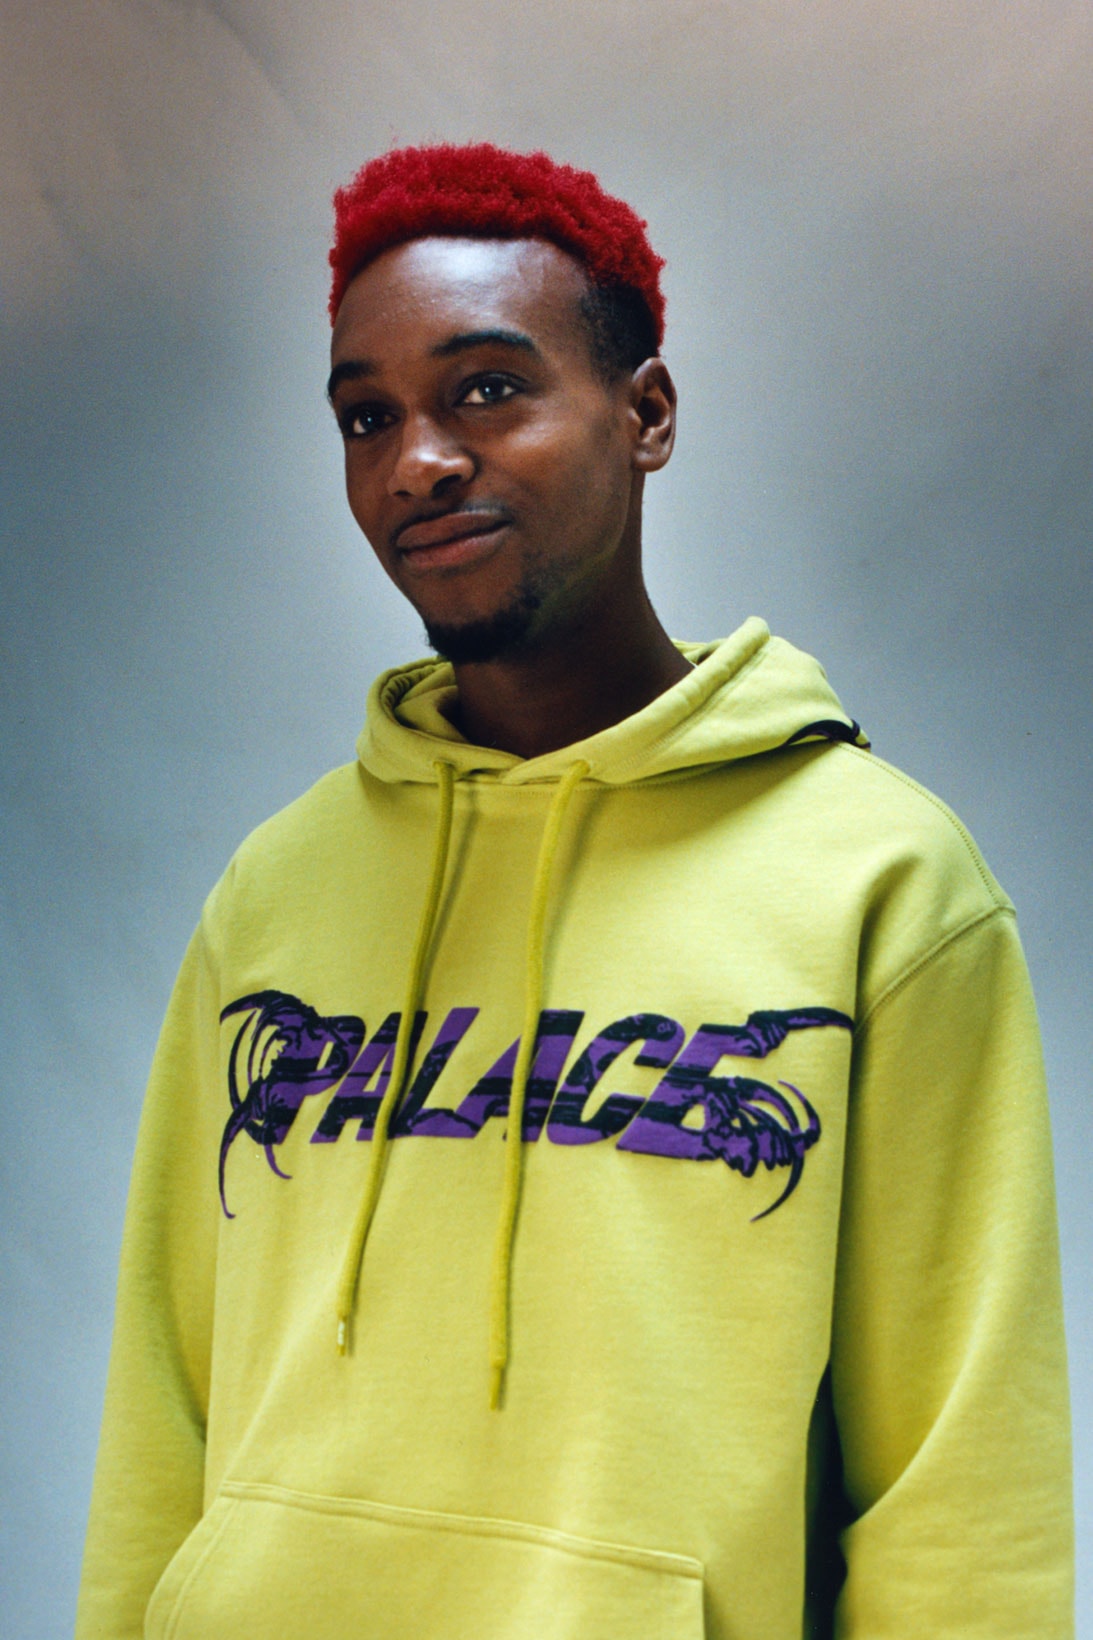 palace skateboards summer 2021 lookbook collection drop hoodie logo